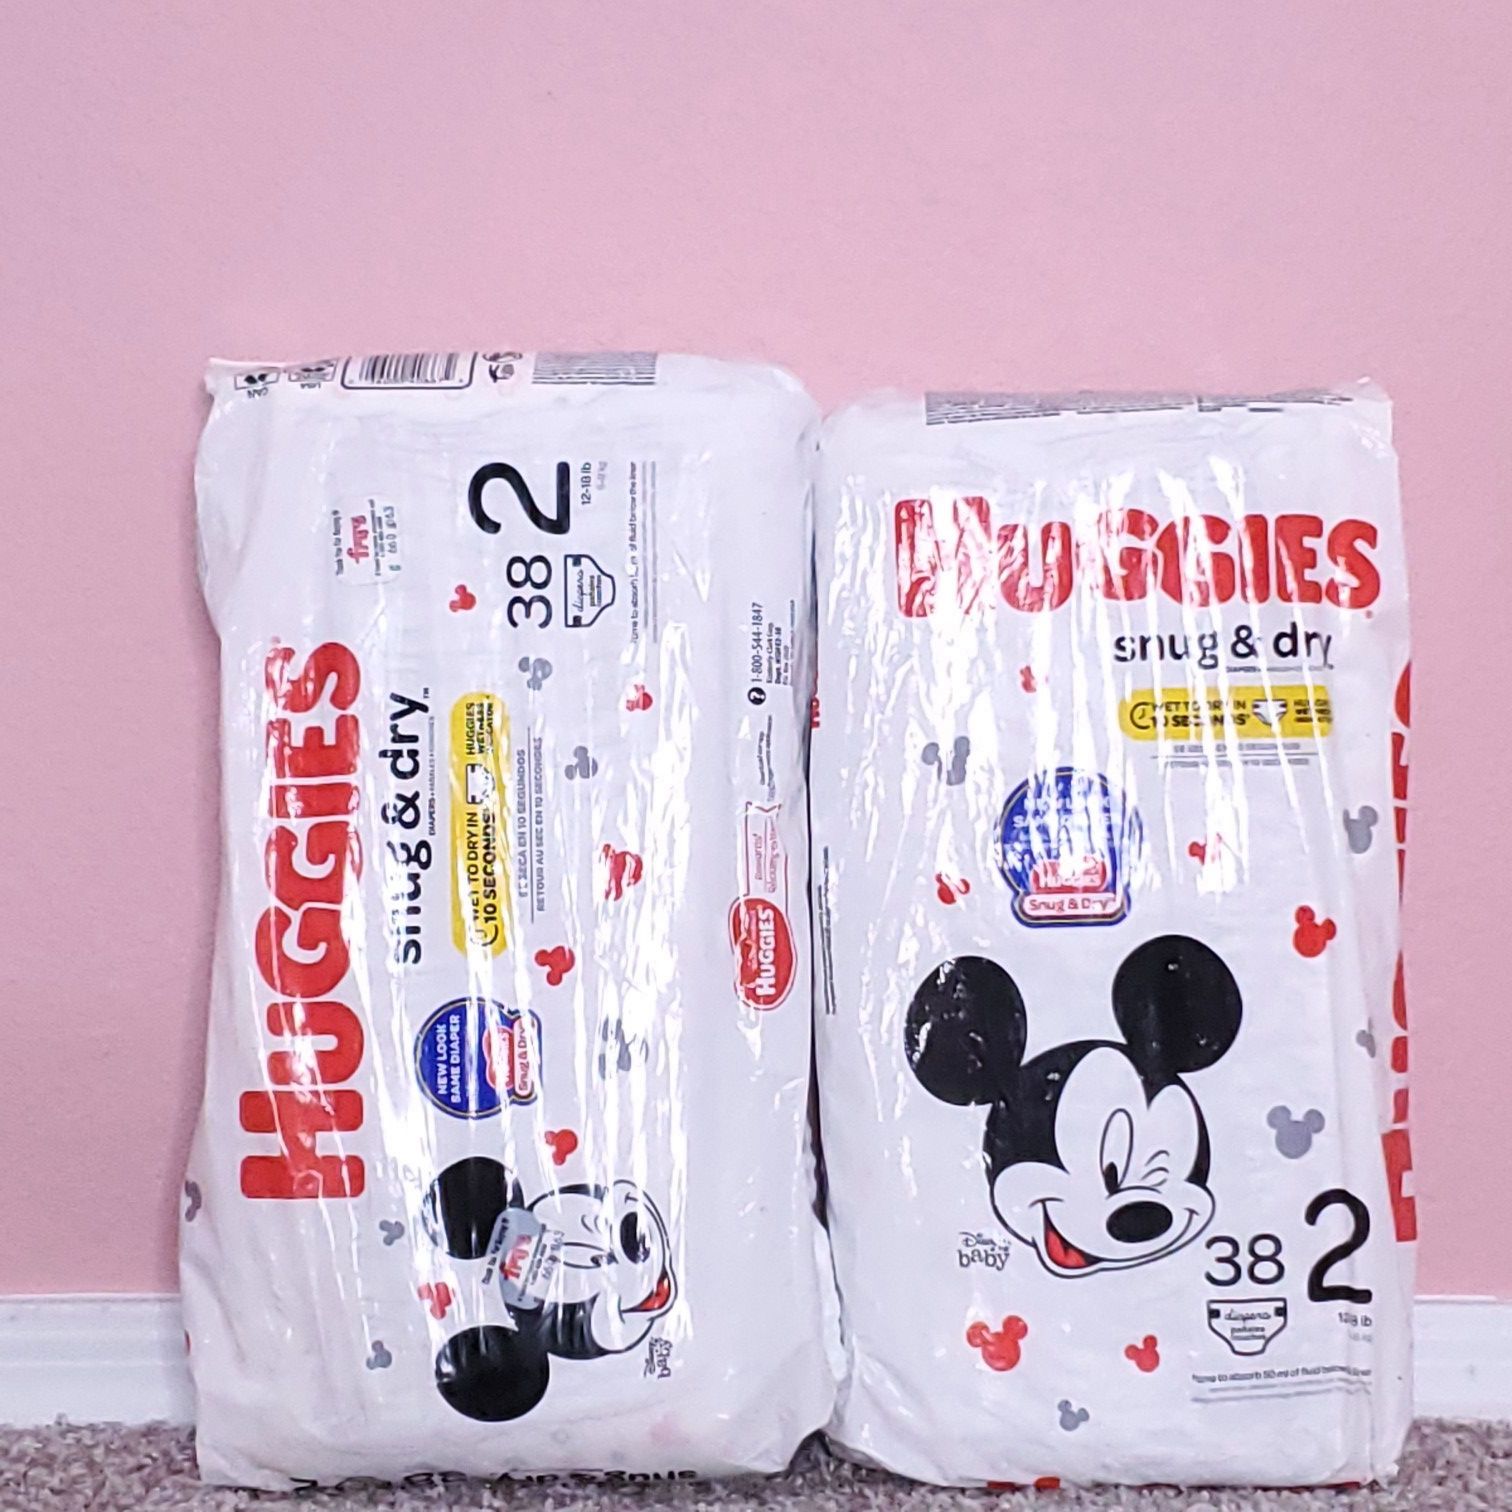 Huggies snug and dry diapers size 2